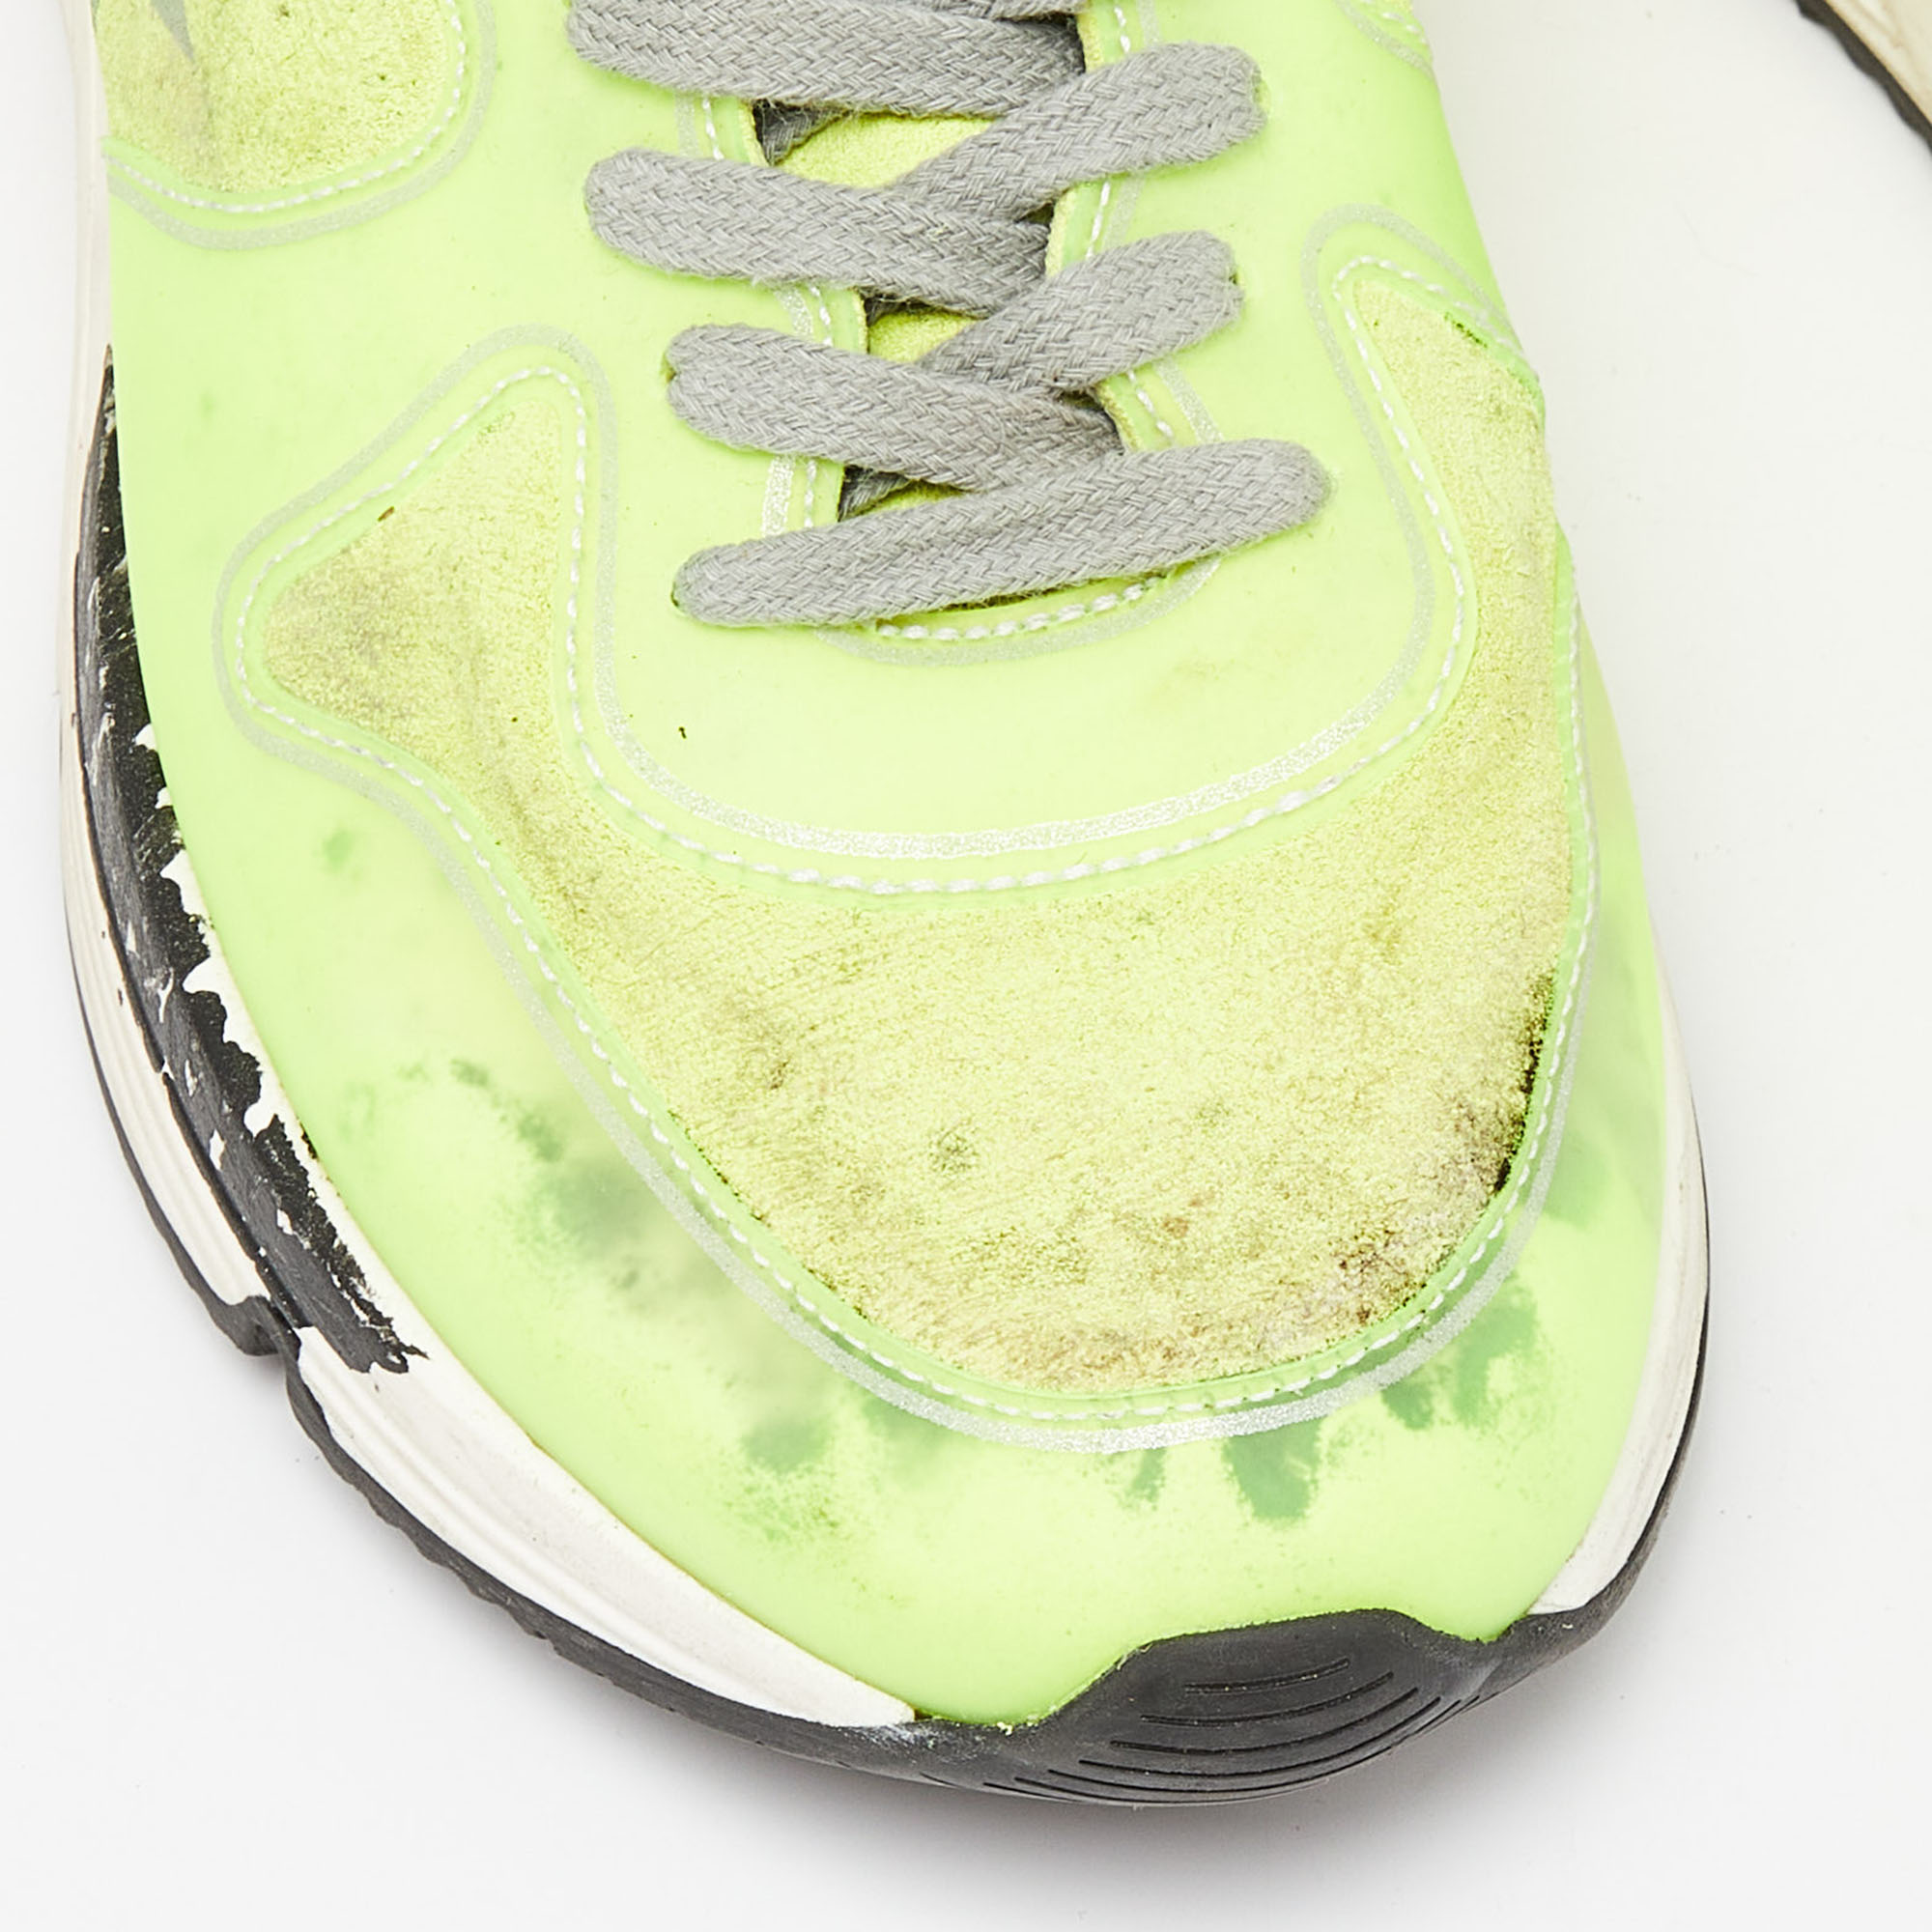 Golden Goose Neon Yellow PVC And Suede Running Sole Sneakers Size 39